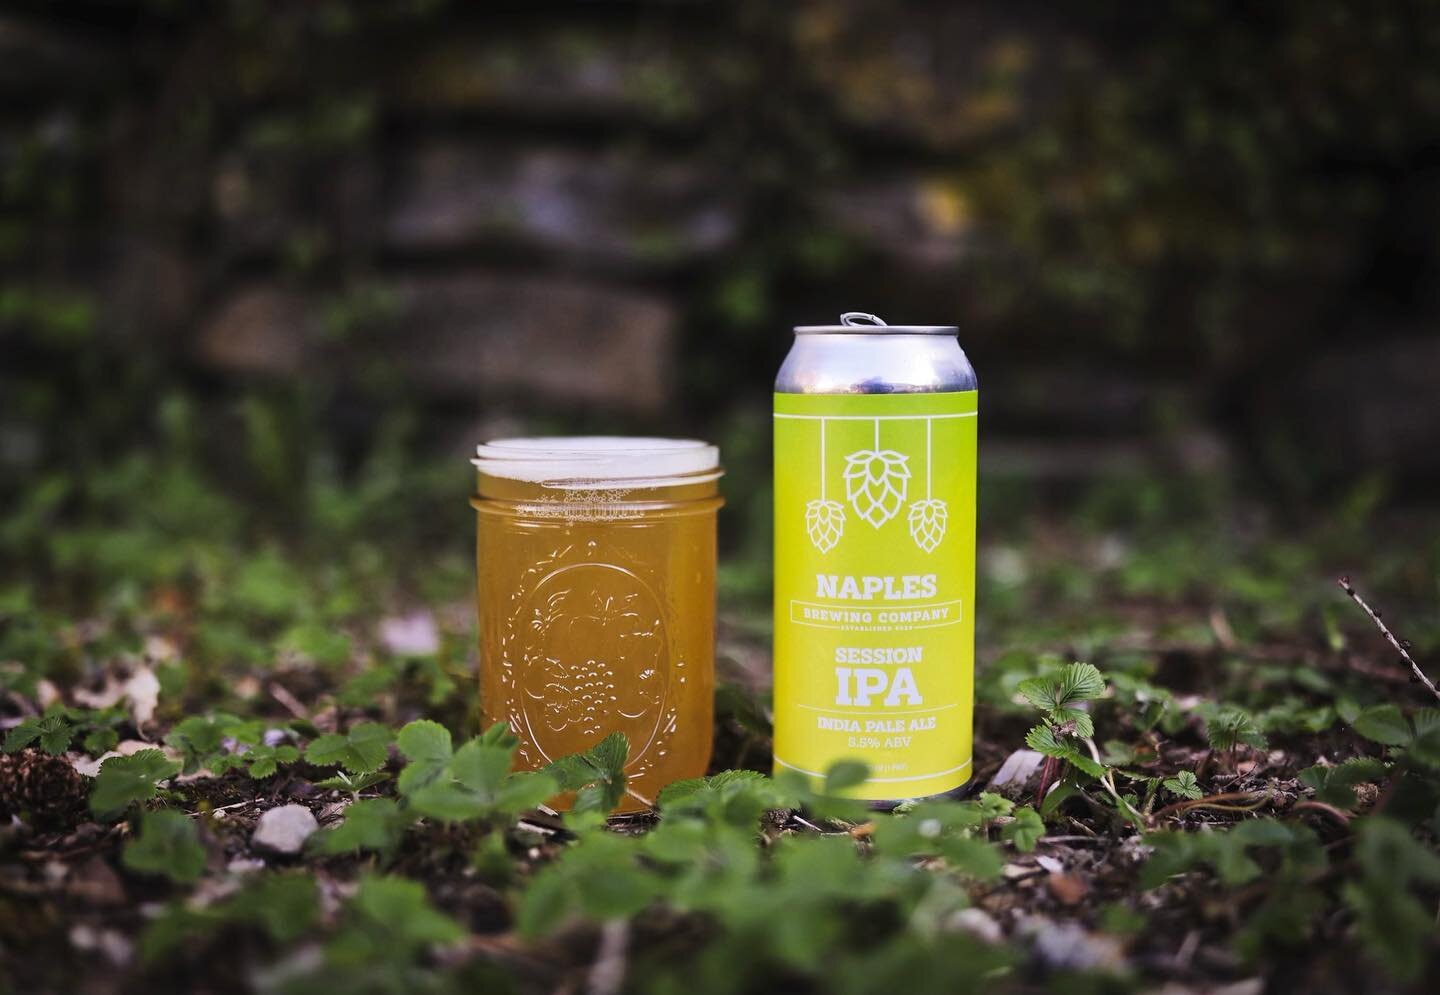 Cans of our Session IPA are back in stock this weekend! Crisp and with a lower ABV than other IPAs, this one is loaded with Pilsner malt from @murmurationmalts and Paradigm hops from @cobblestonehops. 

We&rsquo;ll be here from 1-6, with charcuterie 